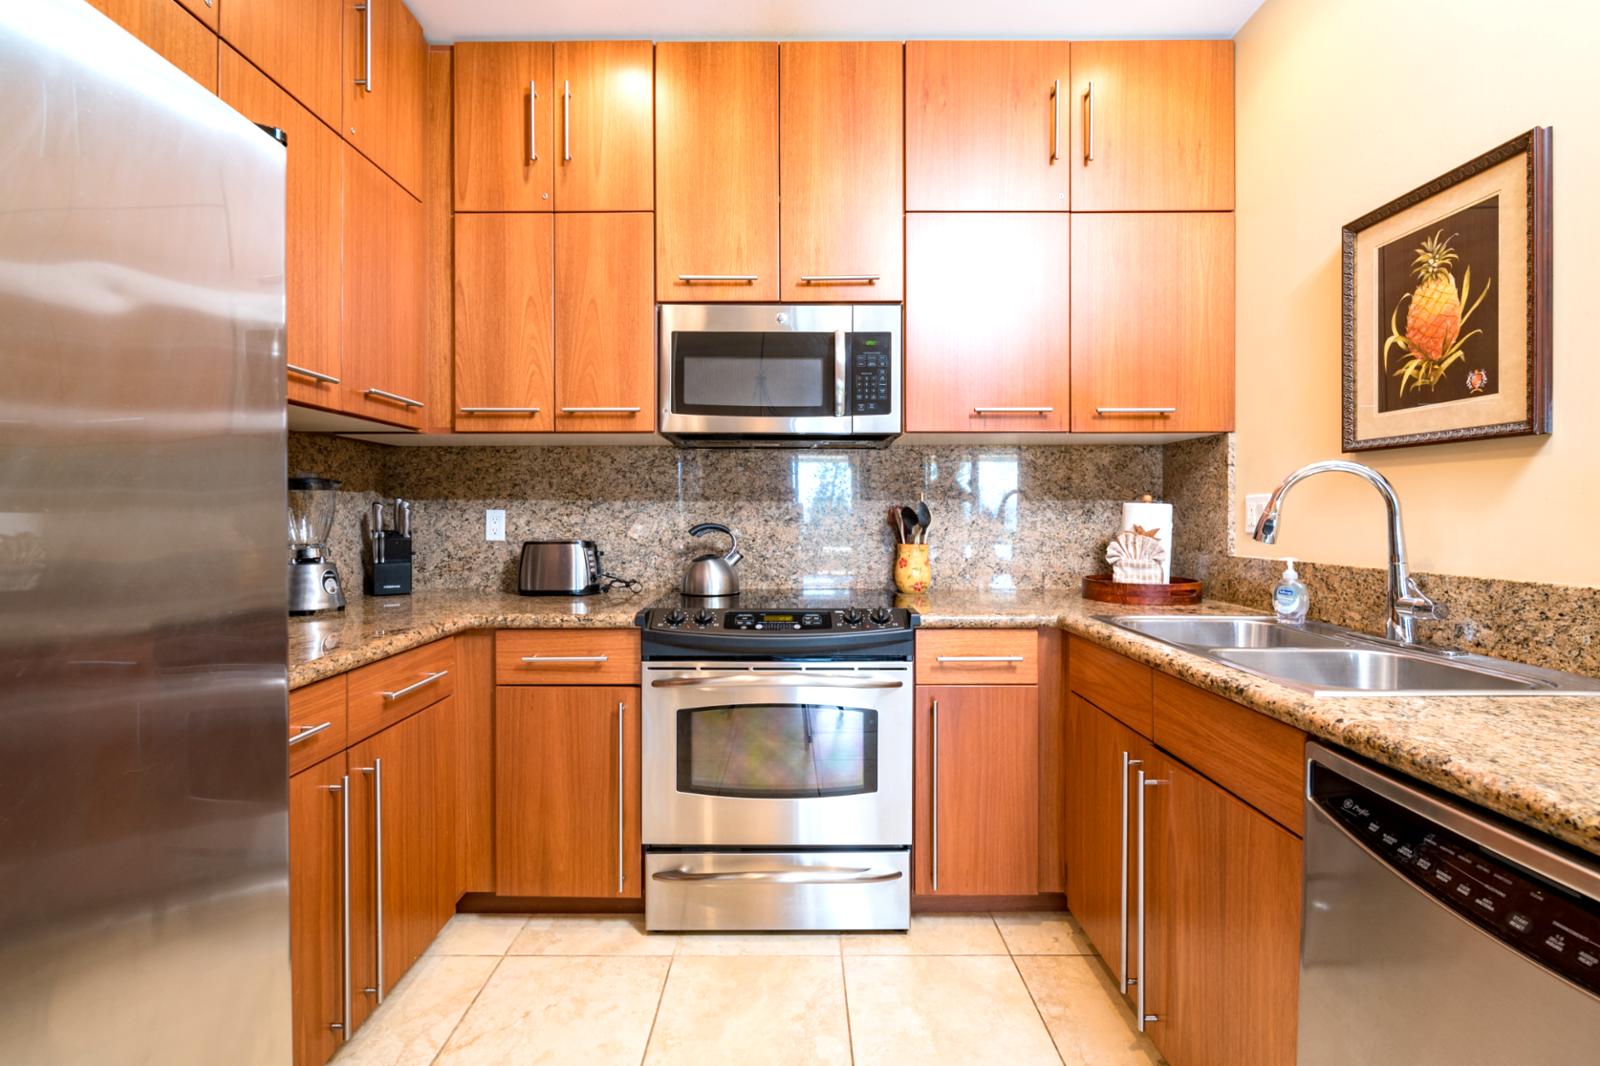 Stainless appliances throughout